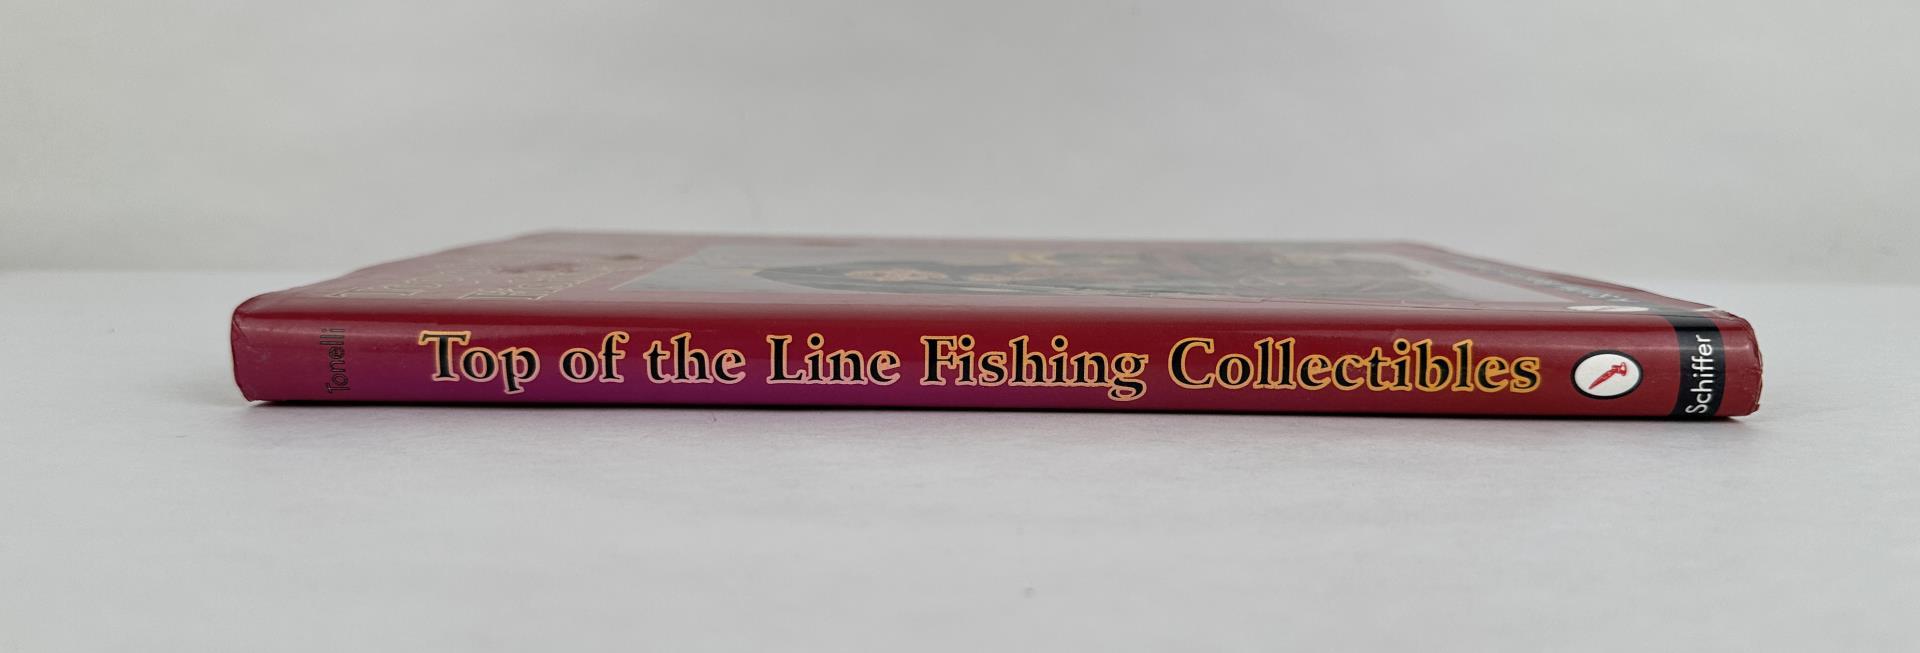 Top Of The Line Fishing Collectibles